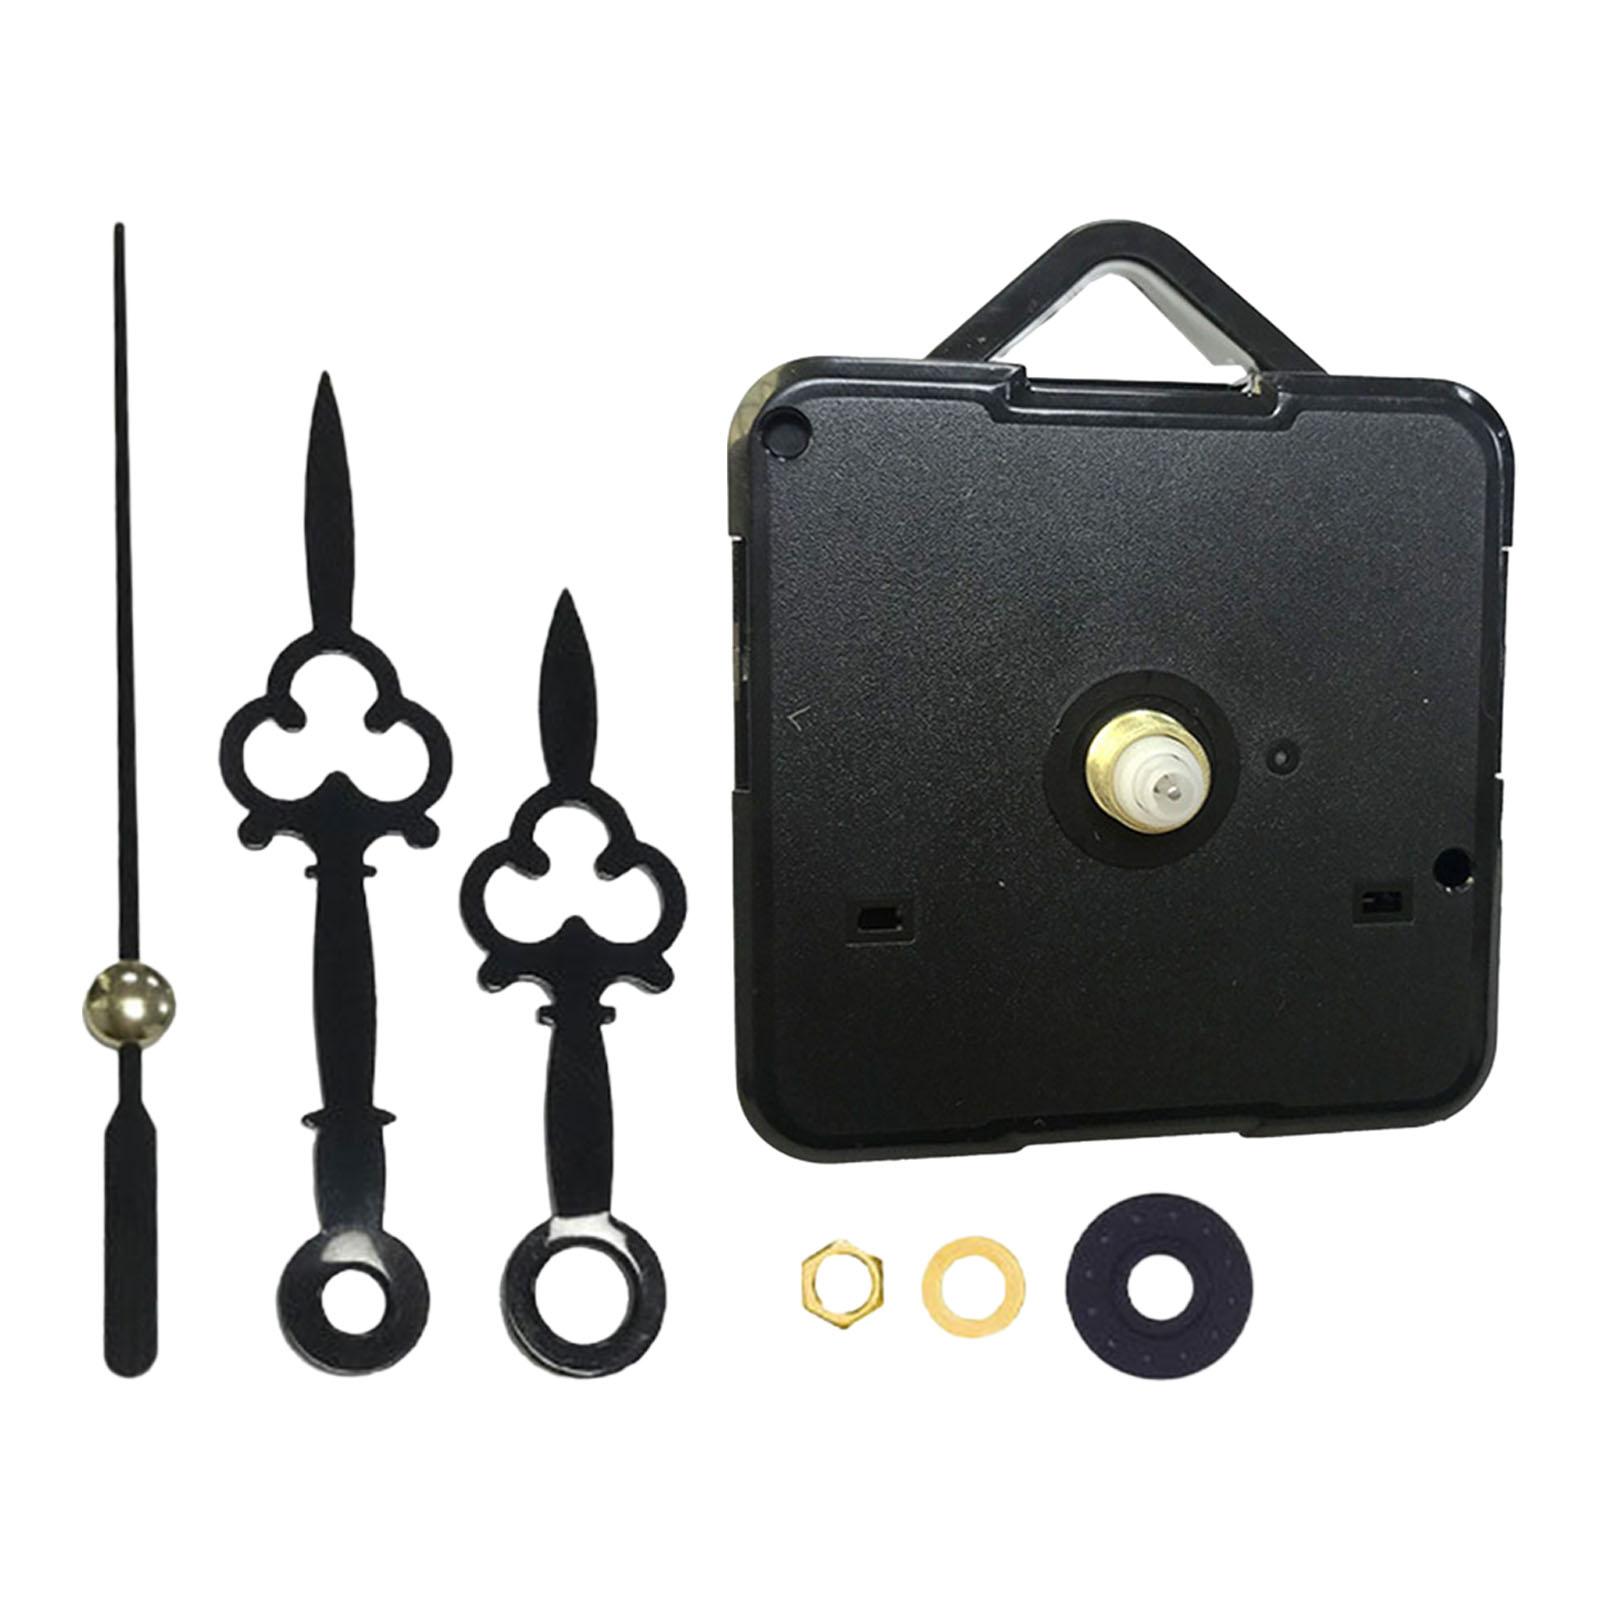 Wall Clock Movement Mechanism Battery Operated Silent Sweep Repair Parts Black 3 Pointer